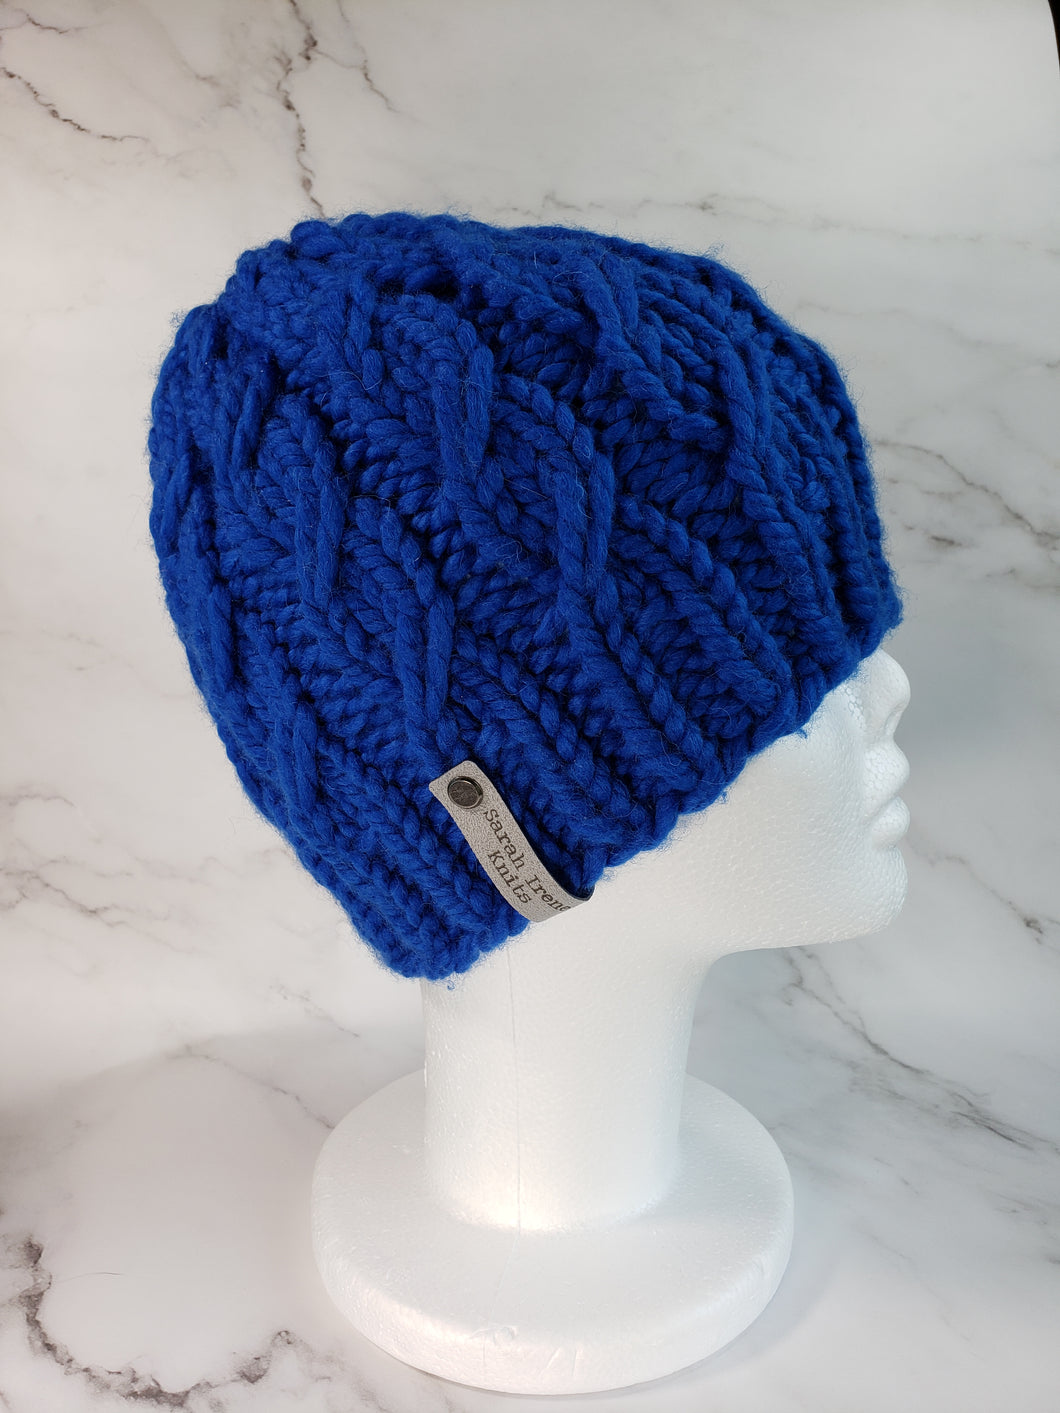 Cable effect beanie in bright blue. No pom.